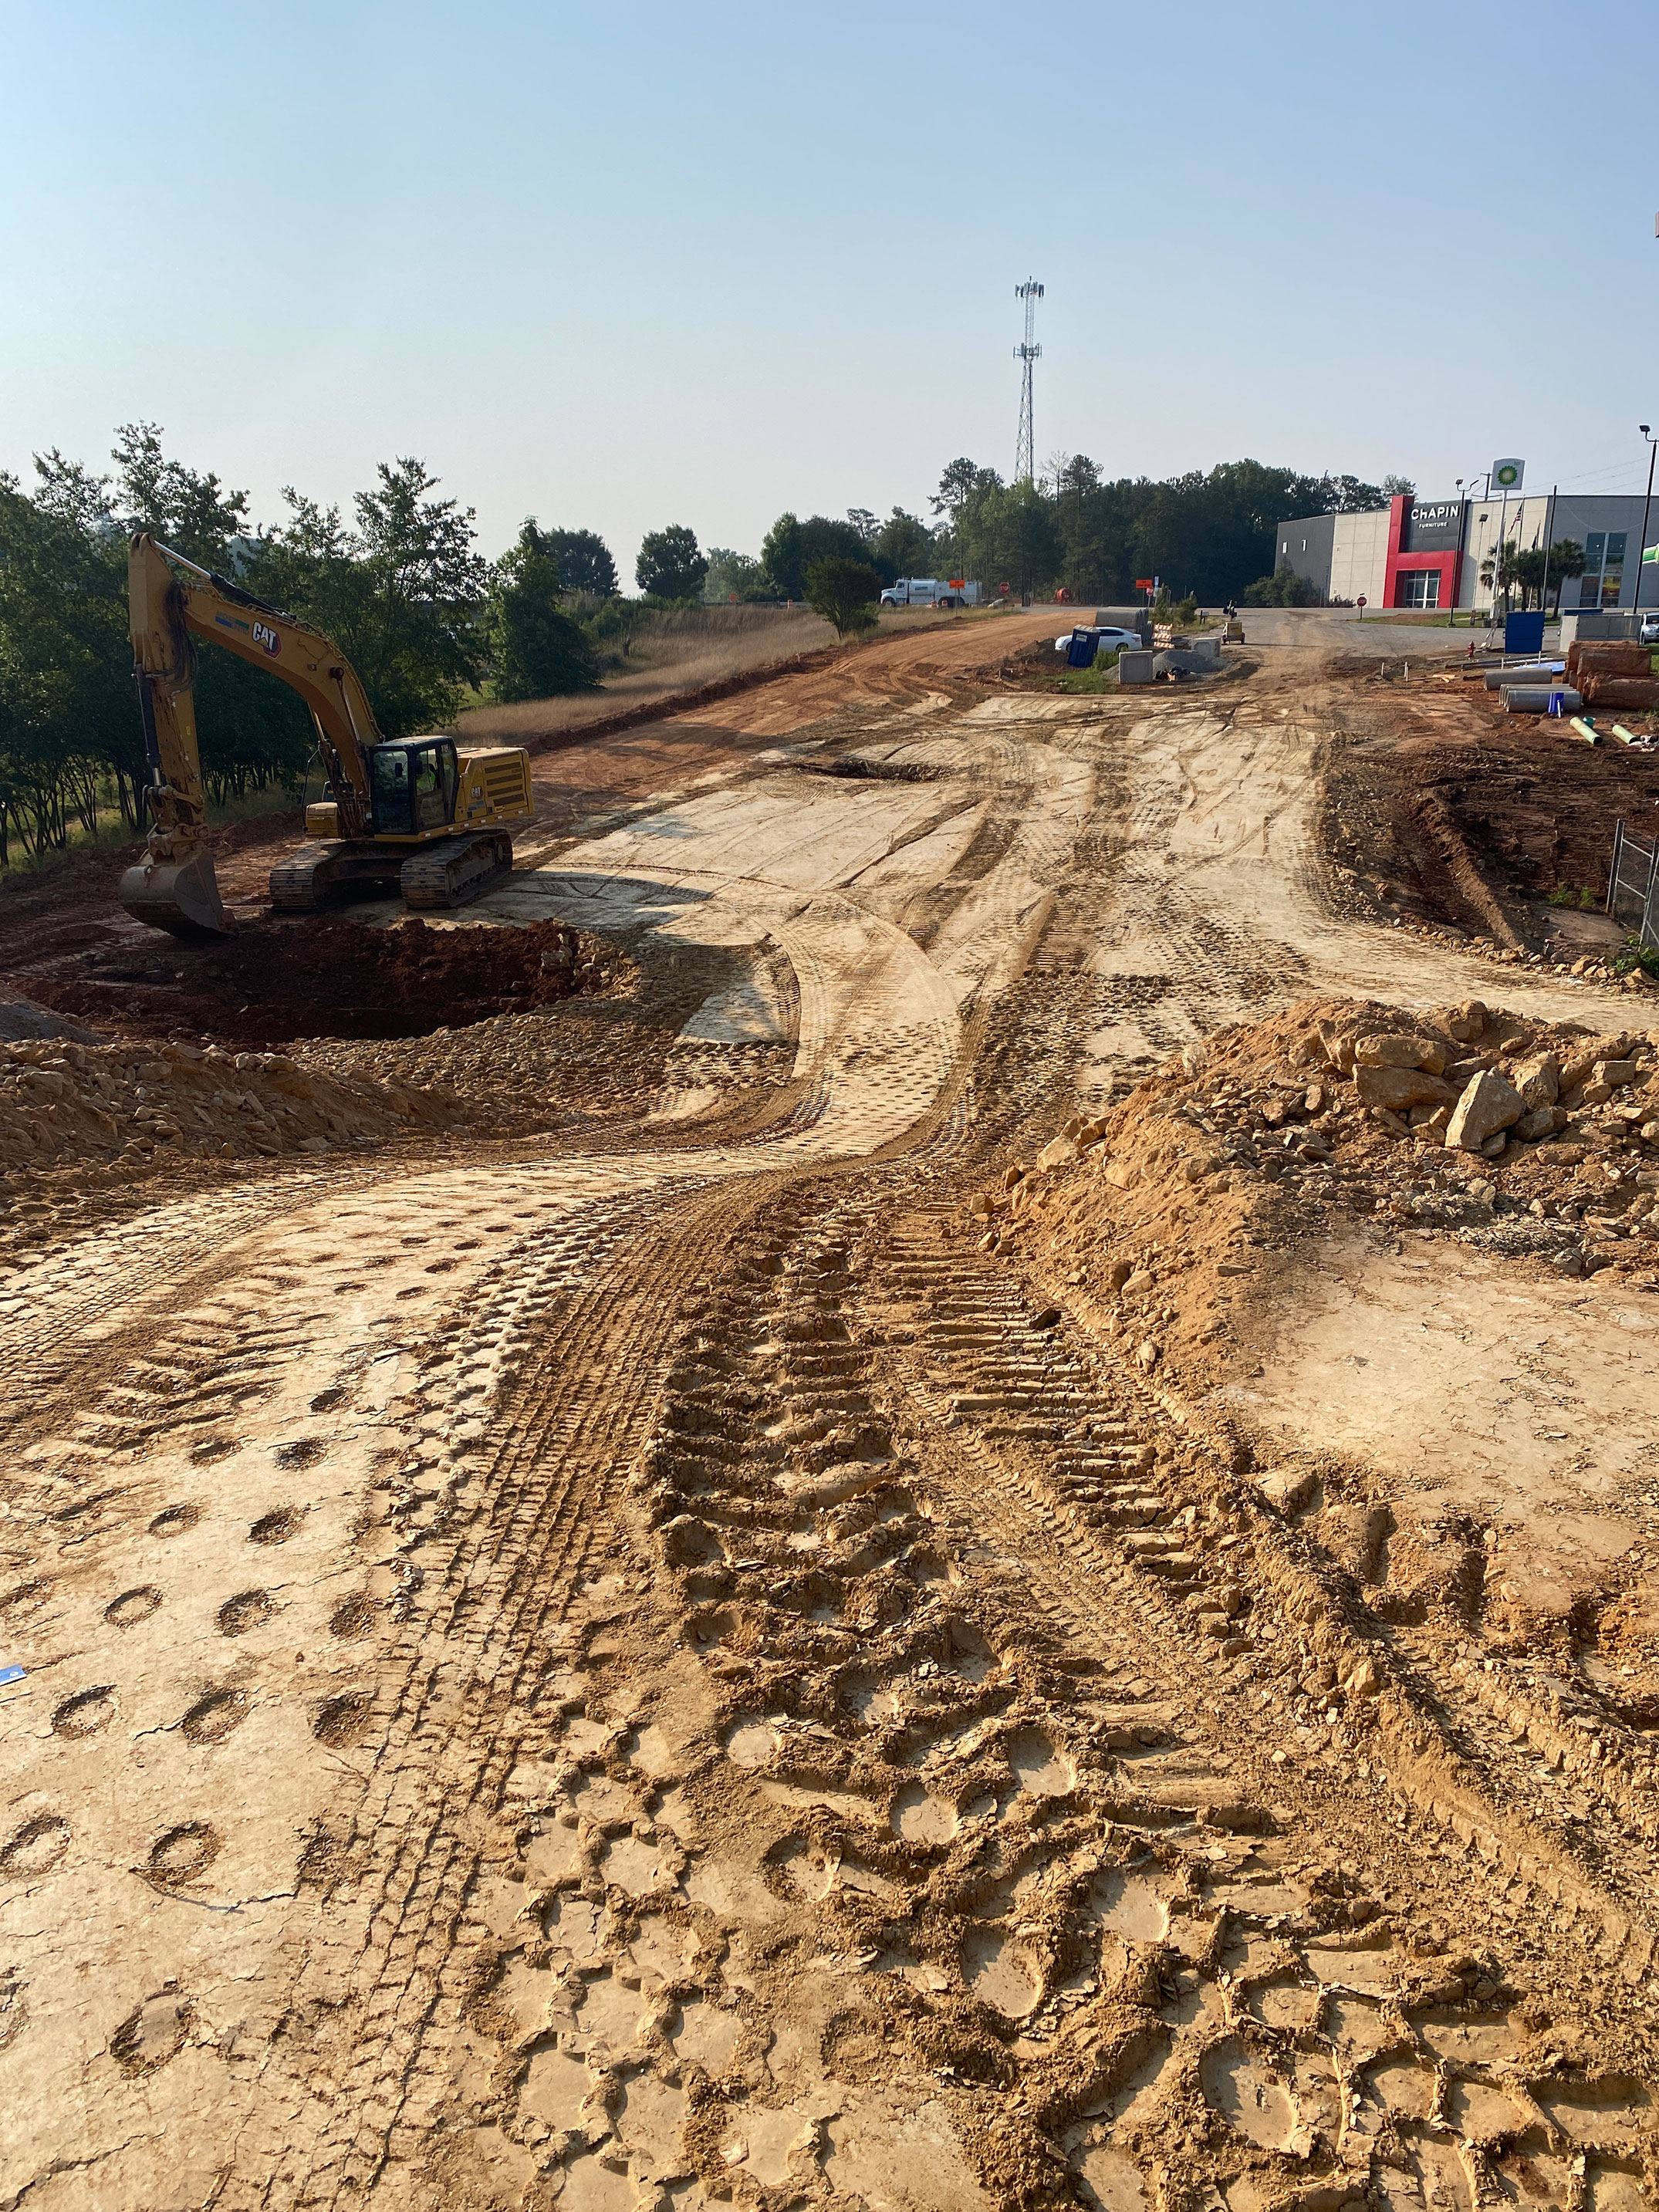 Crews are preparing embankment for the new off ramp at Exit 91 eastbound.  Installation of drain pipes and utility connections are completed as the work progresses.